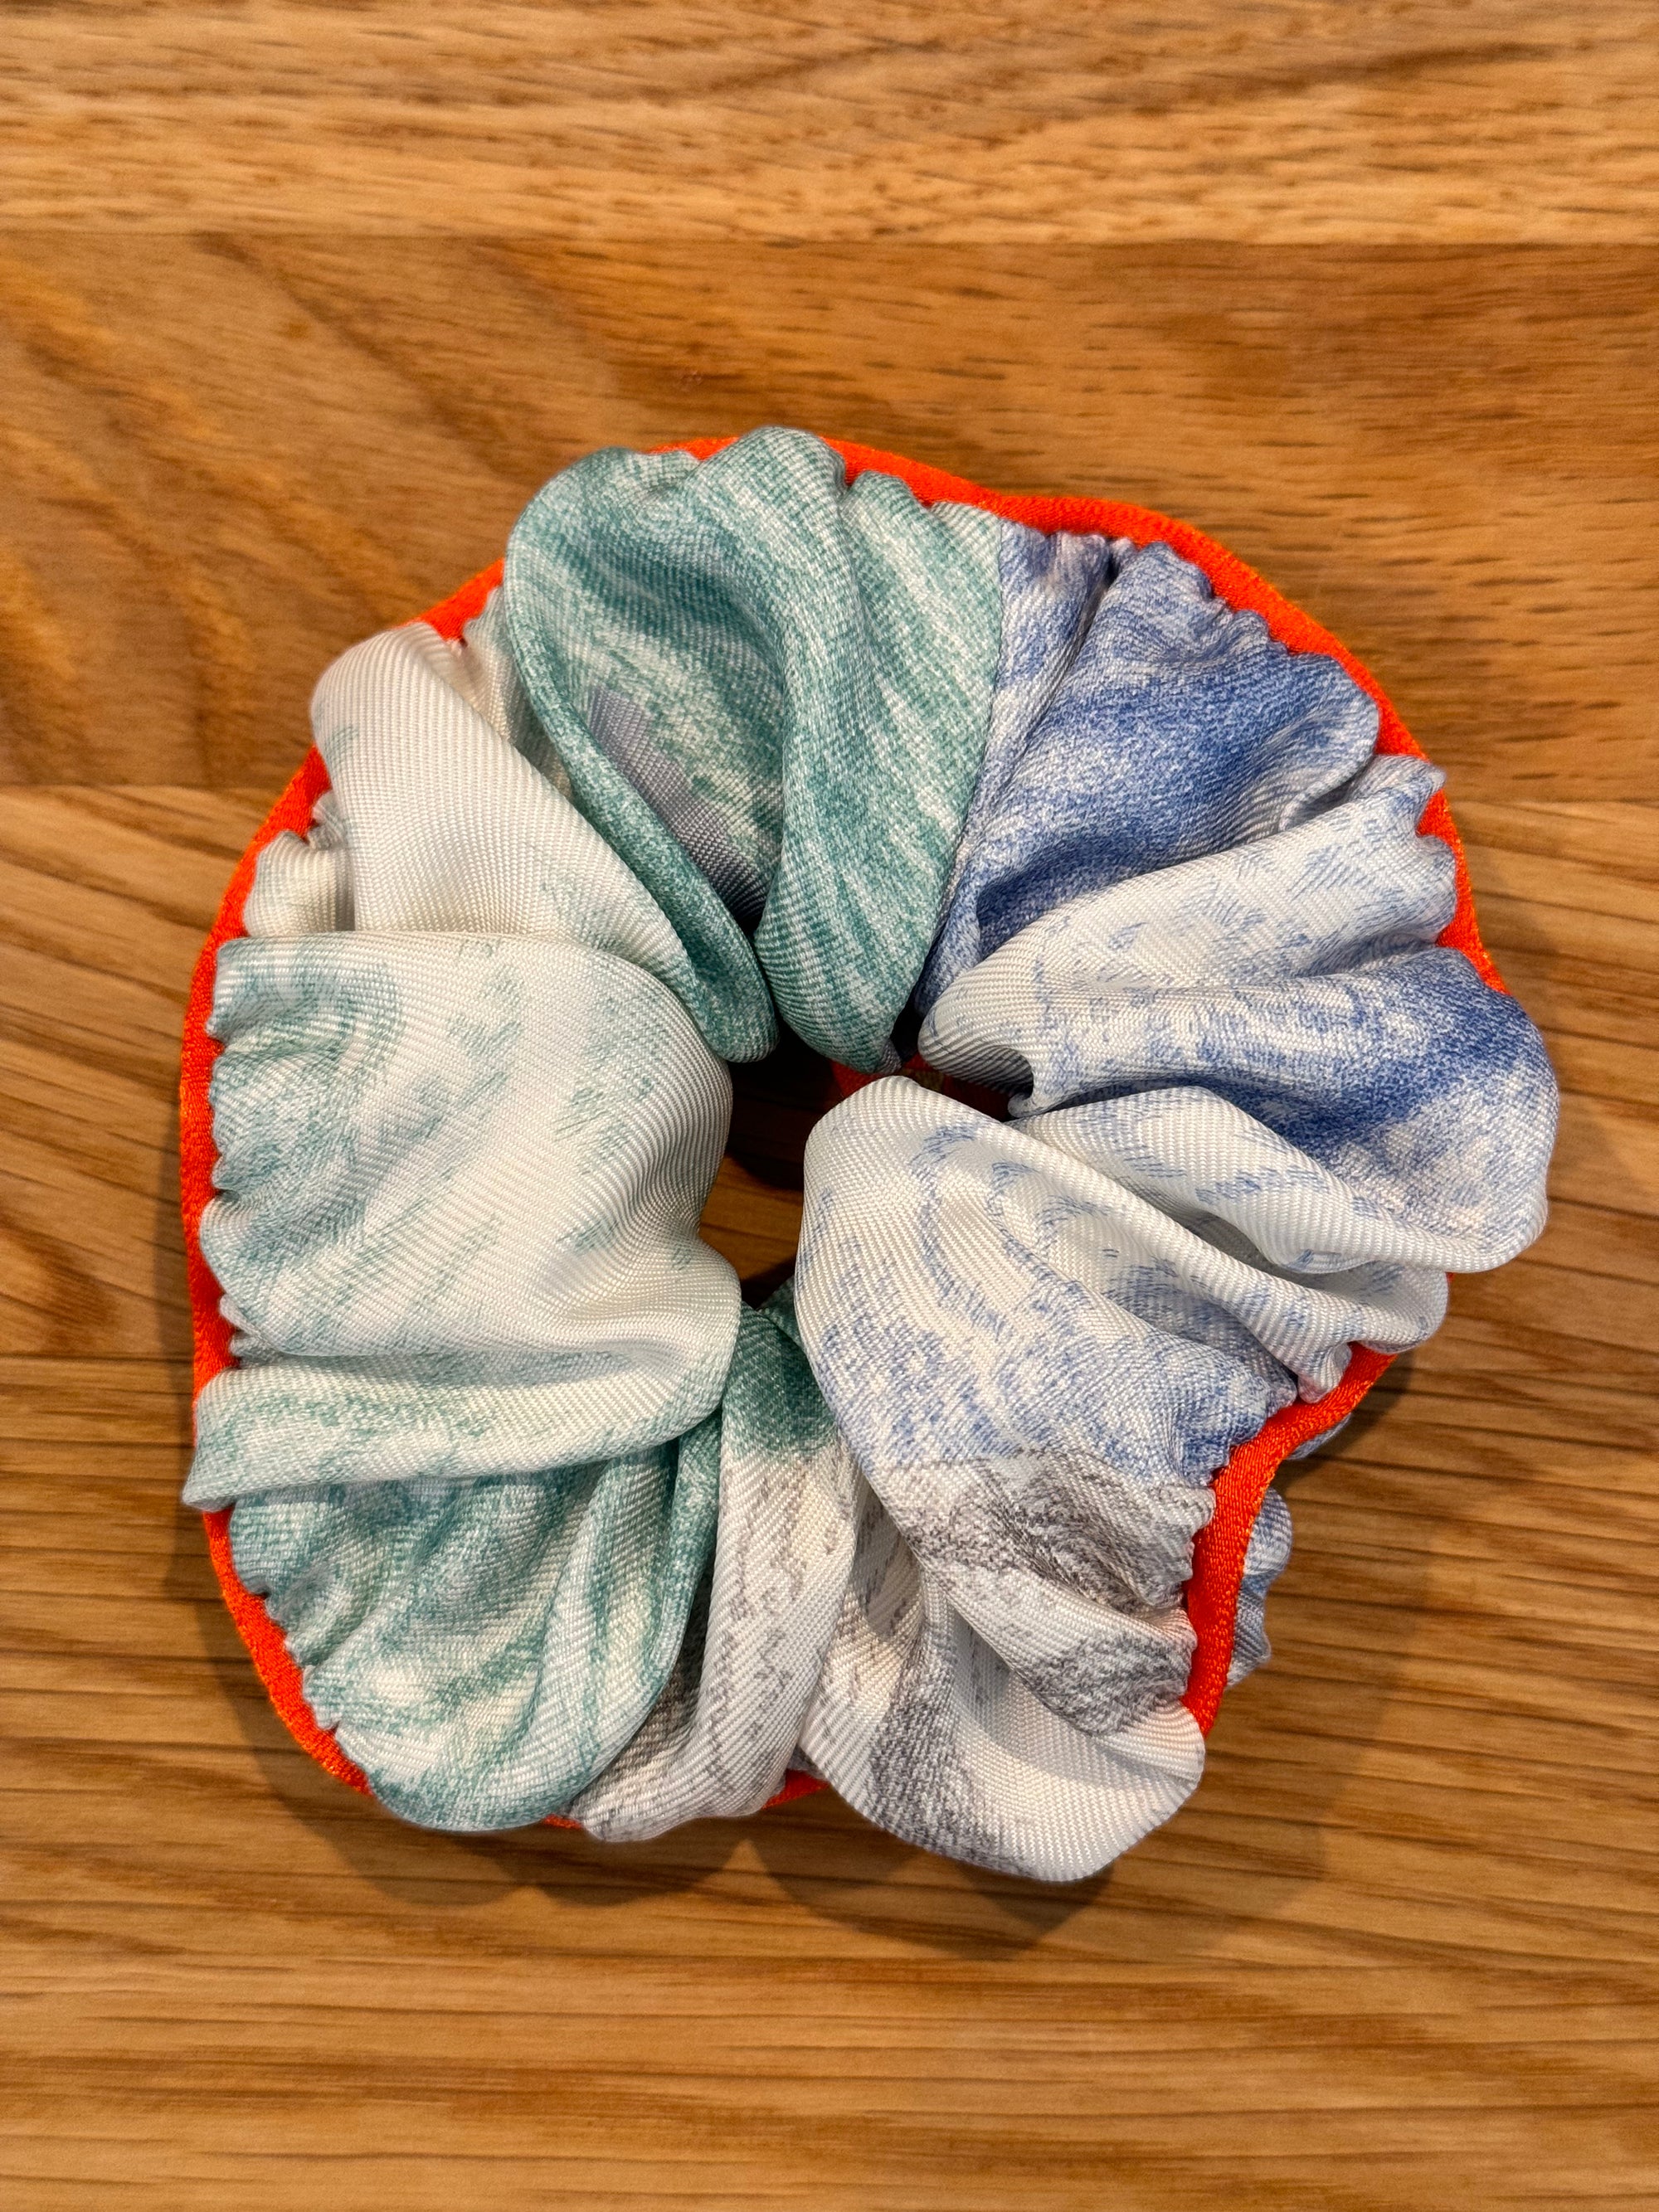 The Up-Cycled Scrunchie